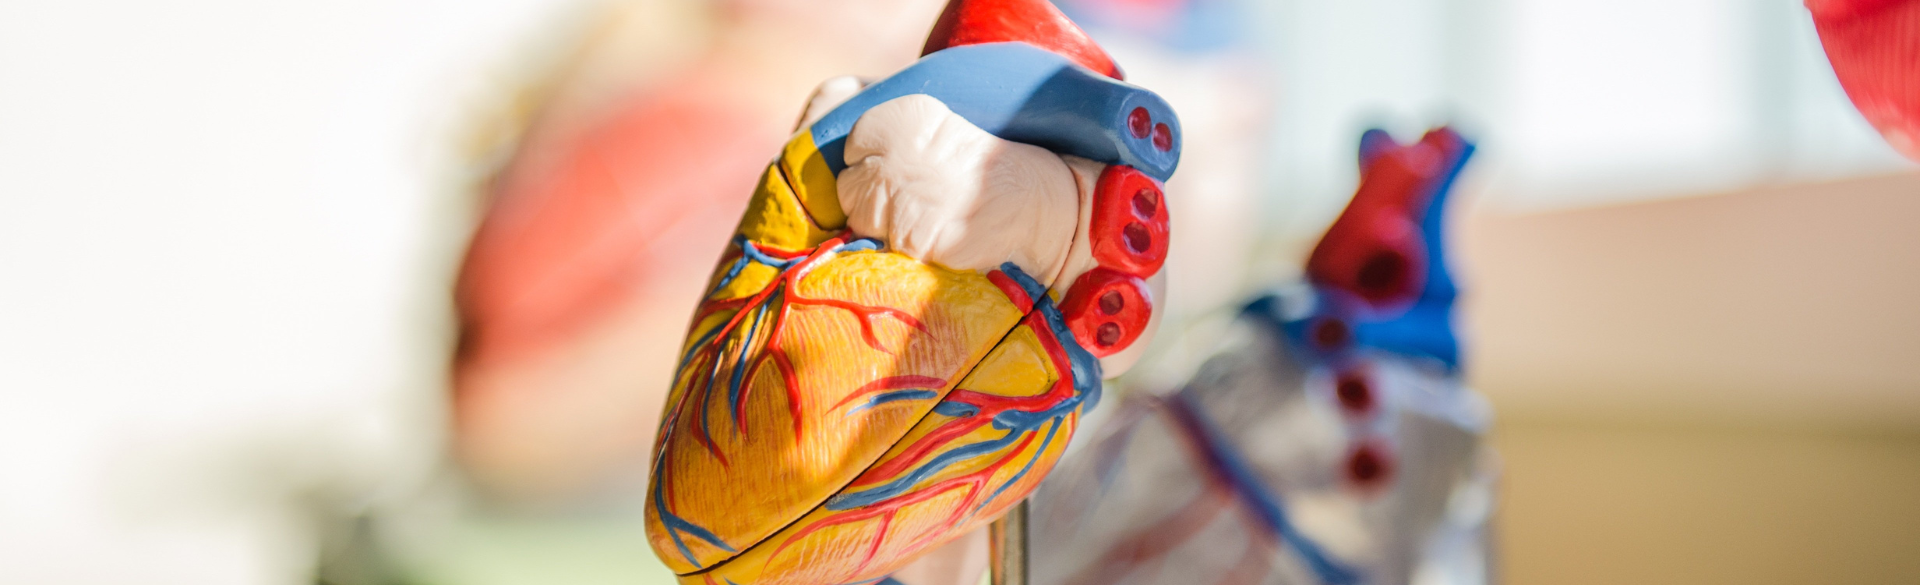 model of human heart | University of Colorado Department of Surgery